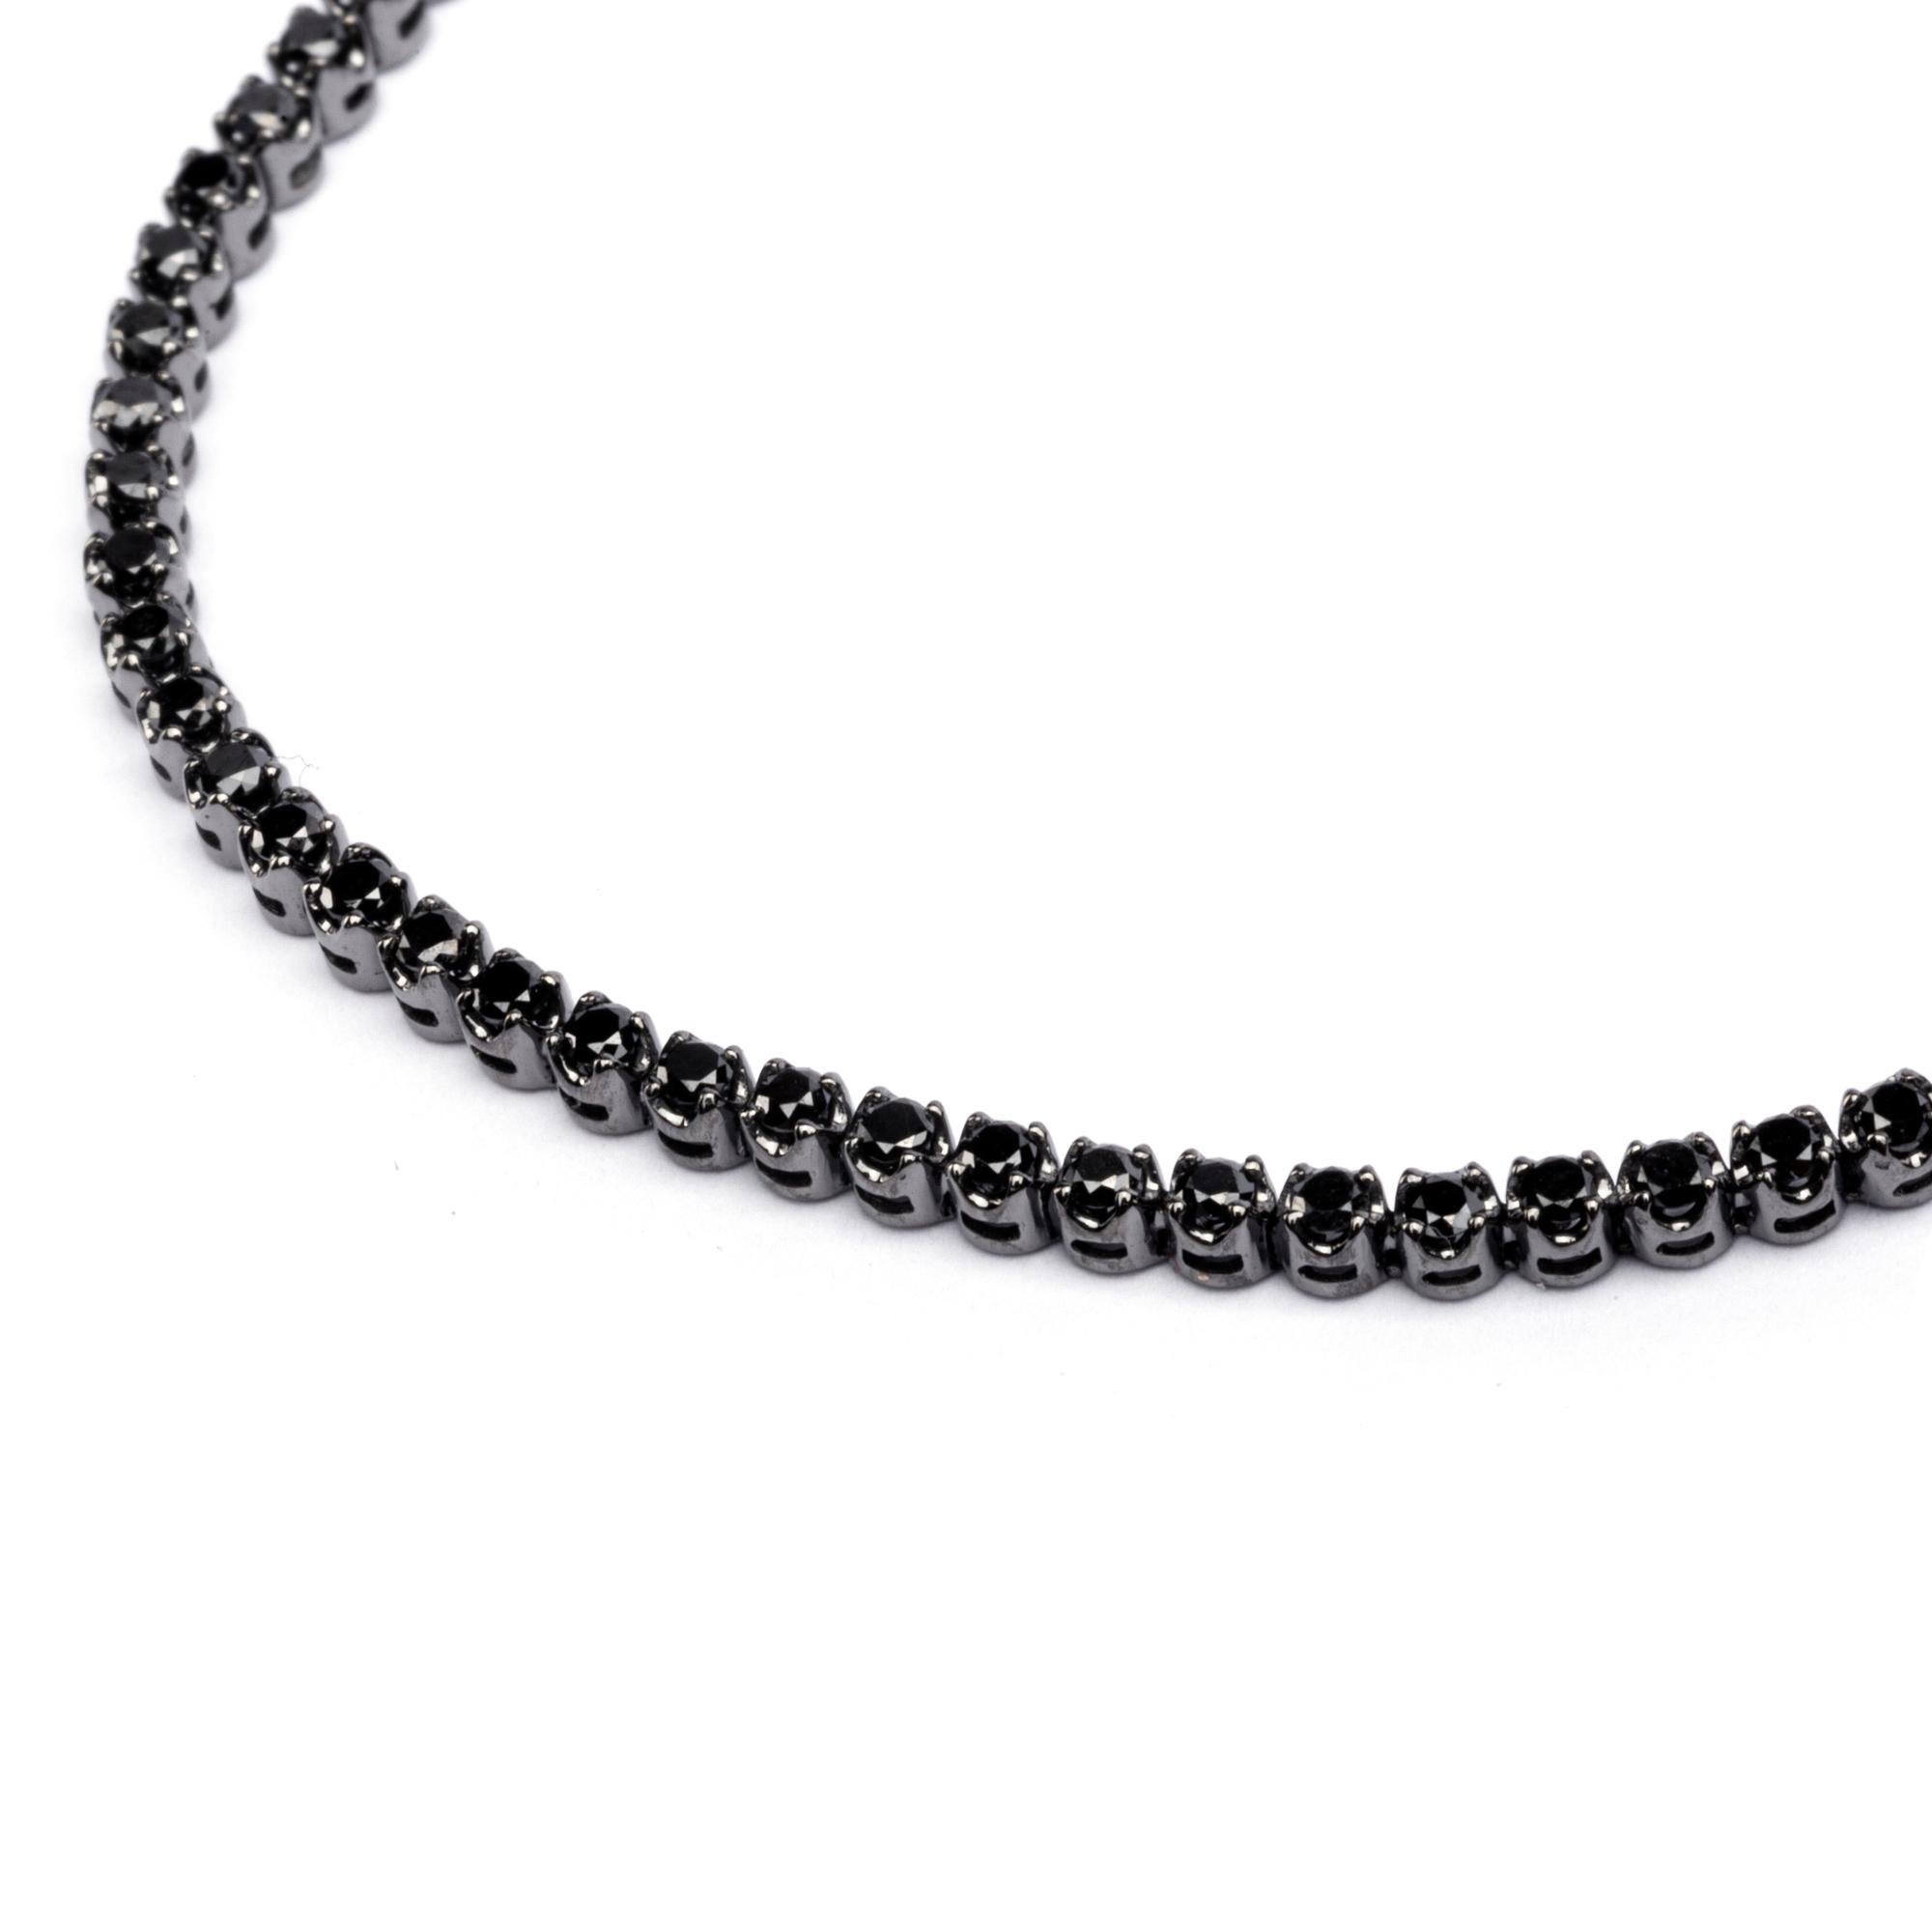 Jona design collection, hand crafted in Italy, 18 karat black rhodium white gold tennis bracelet, 7.48 in/19 cm long, set with 70 black diamonds weighing 3.22 carats in total. Dimensions: 7.48 in. L / 0.09 in. D/ 0.13 in. H - 190 mm L / 2.50 mm D